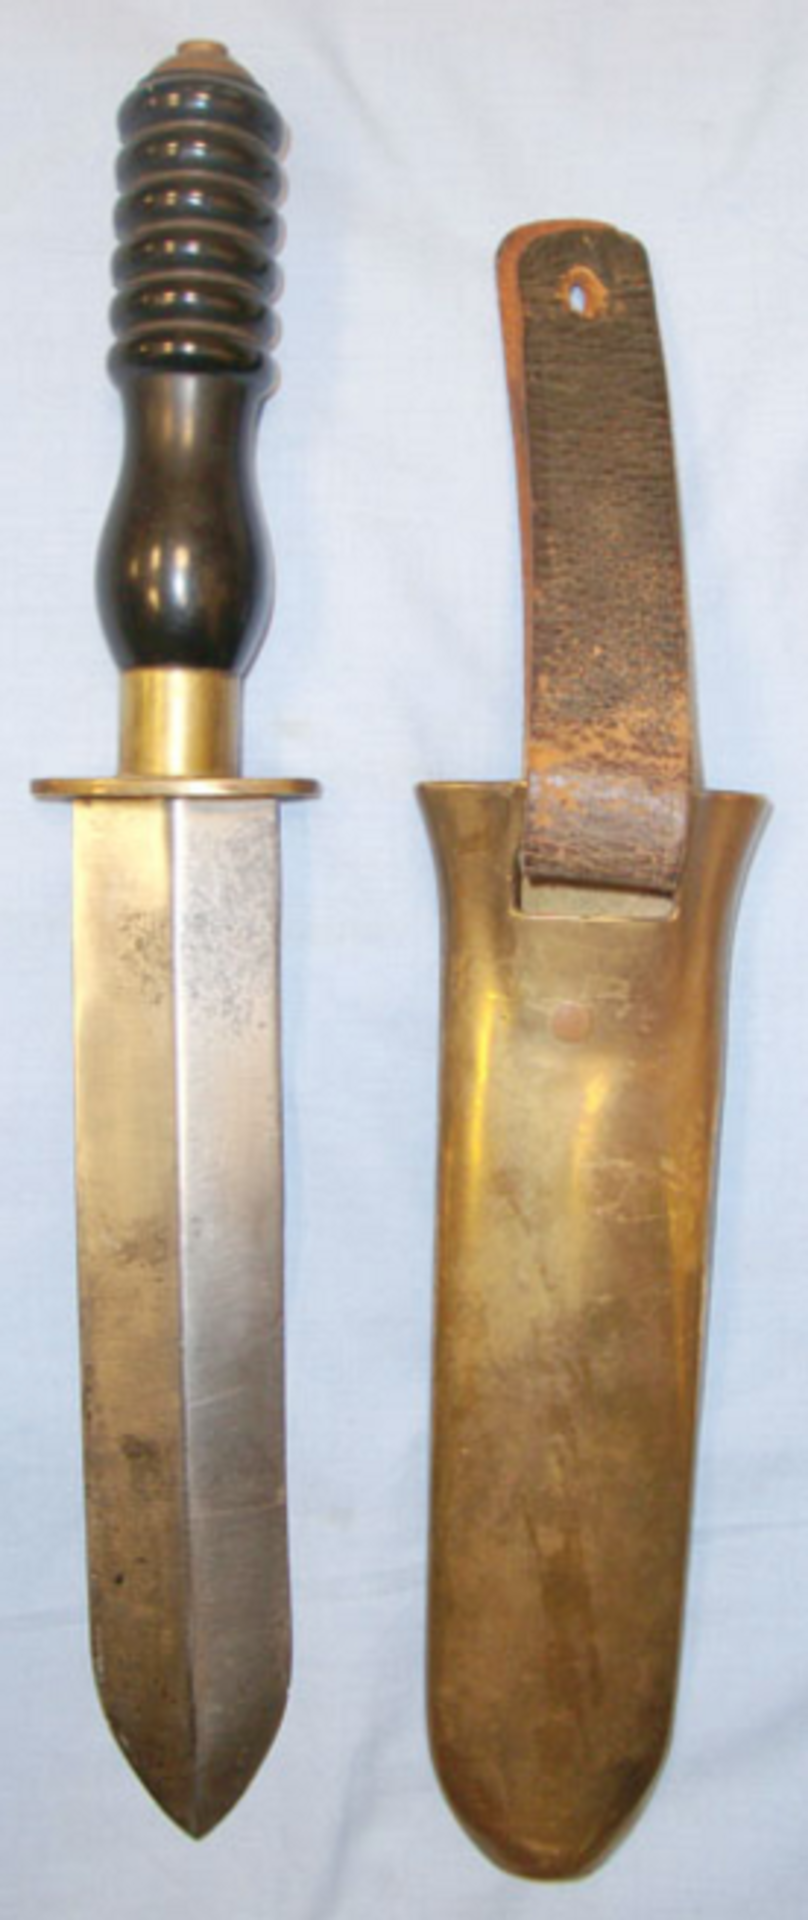 Mint, 1960's British Royal Navy Diver's Knife By Siebe Gorman & Co Ltd & Brass Scabbard - Image 3 of 3